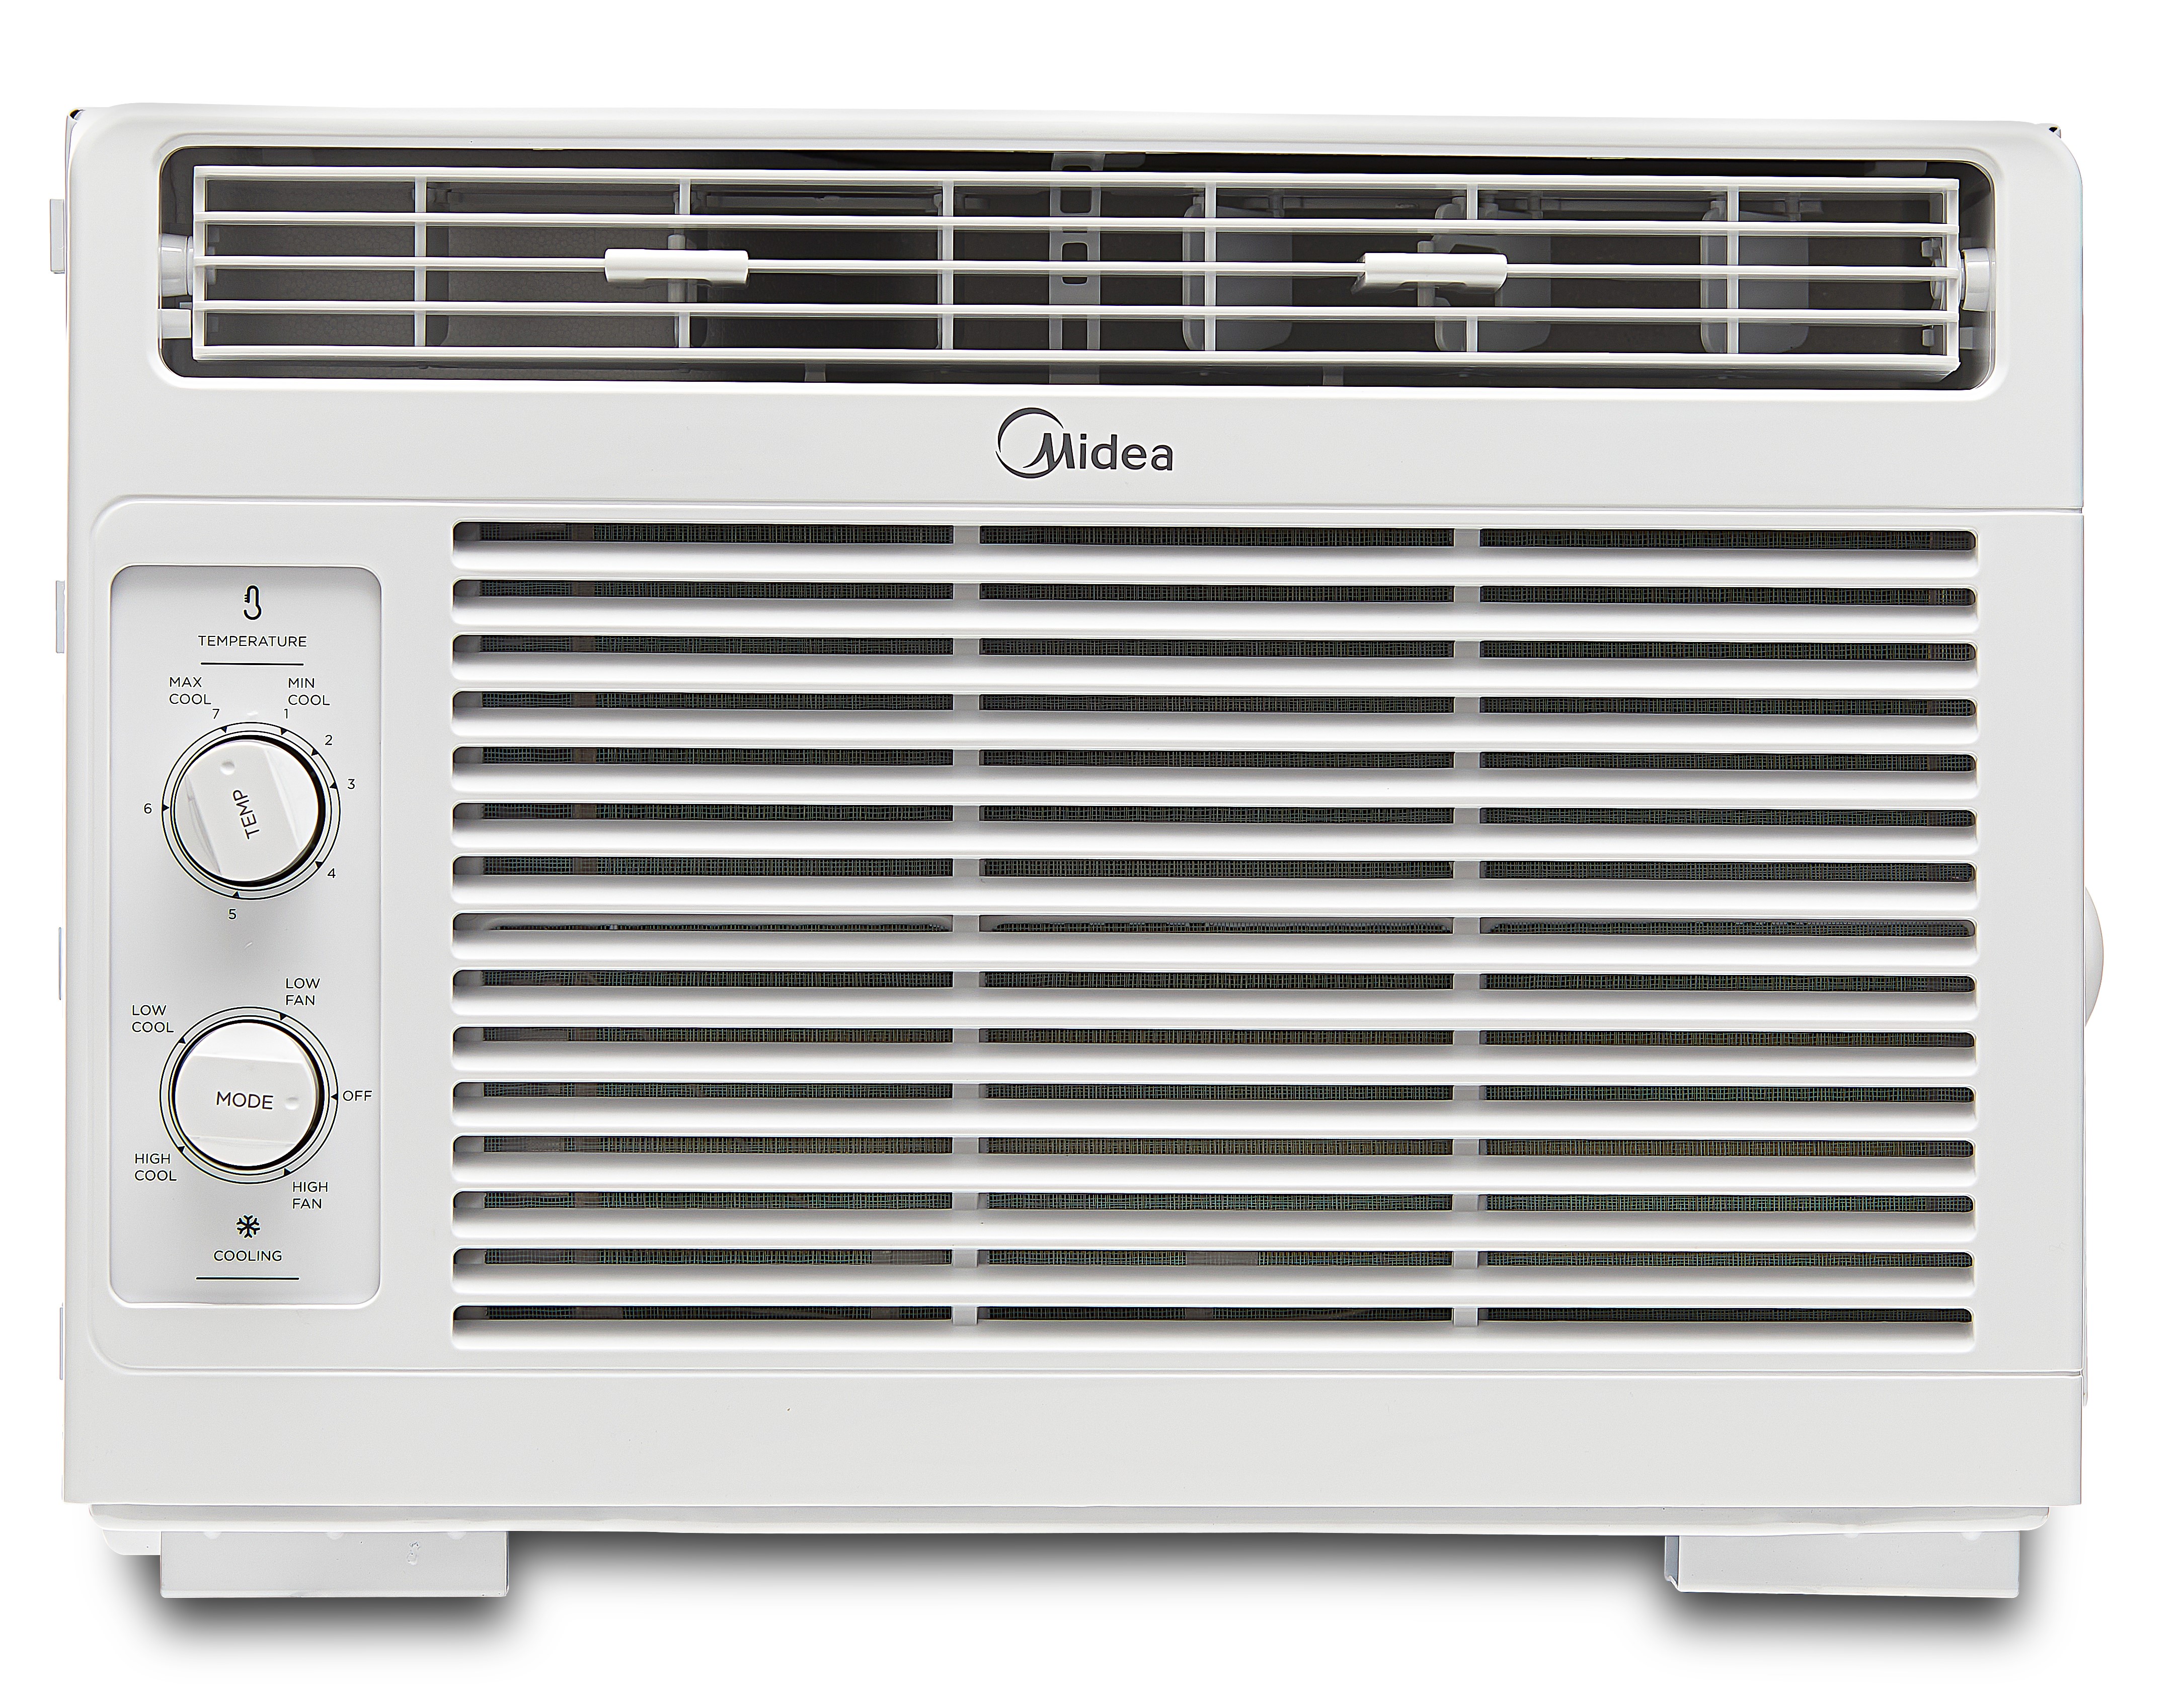 Midea 5,000 BTU 150 Sq ft Mechanical Window Air Conditioner, White, MAW05M1WWT - image 1 of 17